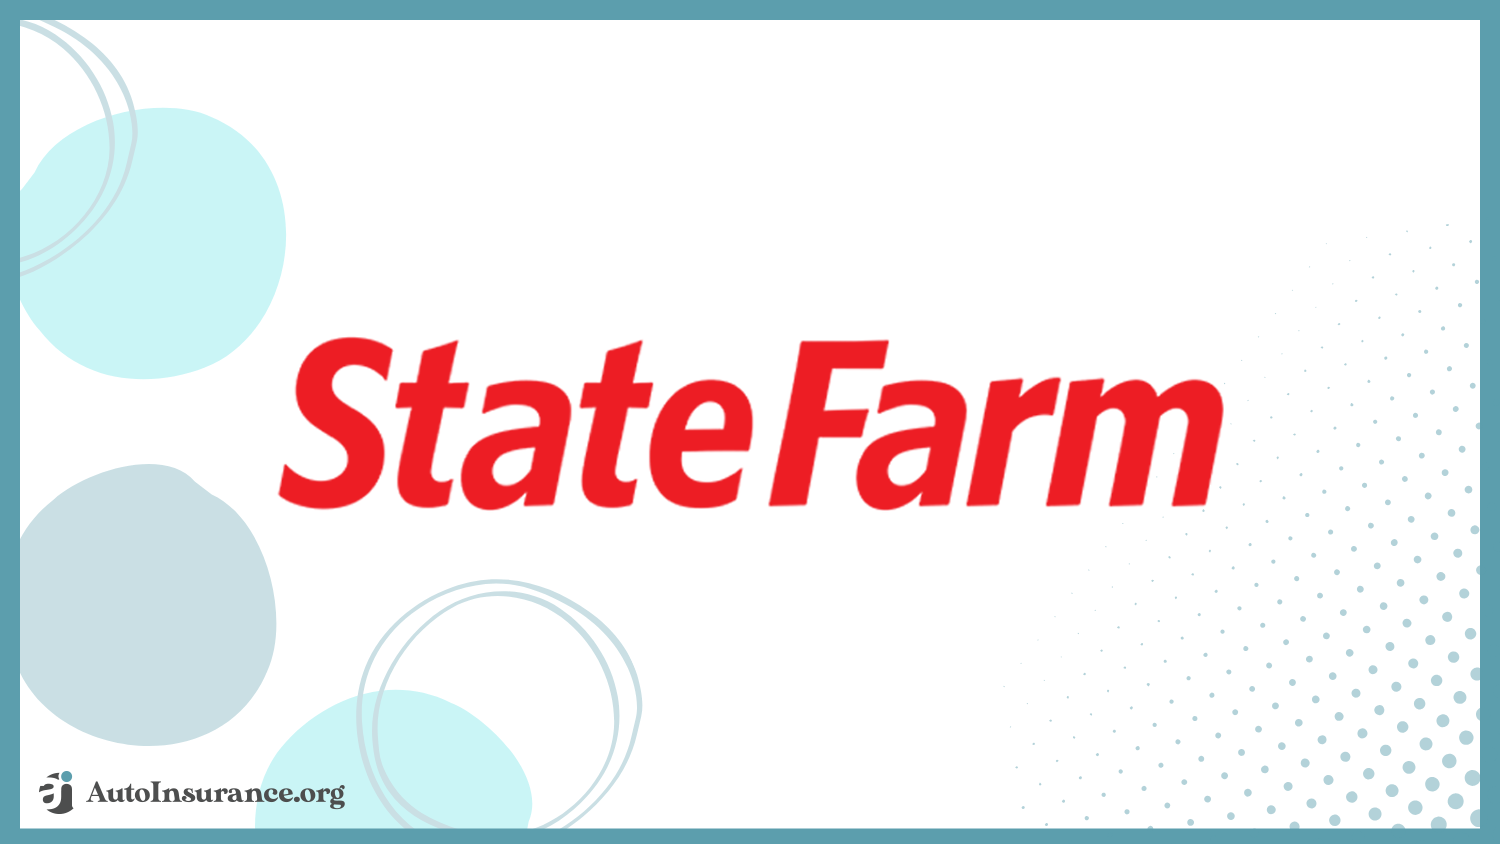 State Farm: Best Auto Insurance for Doctors